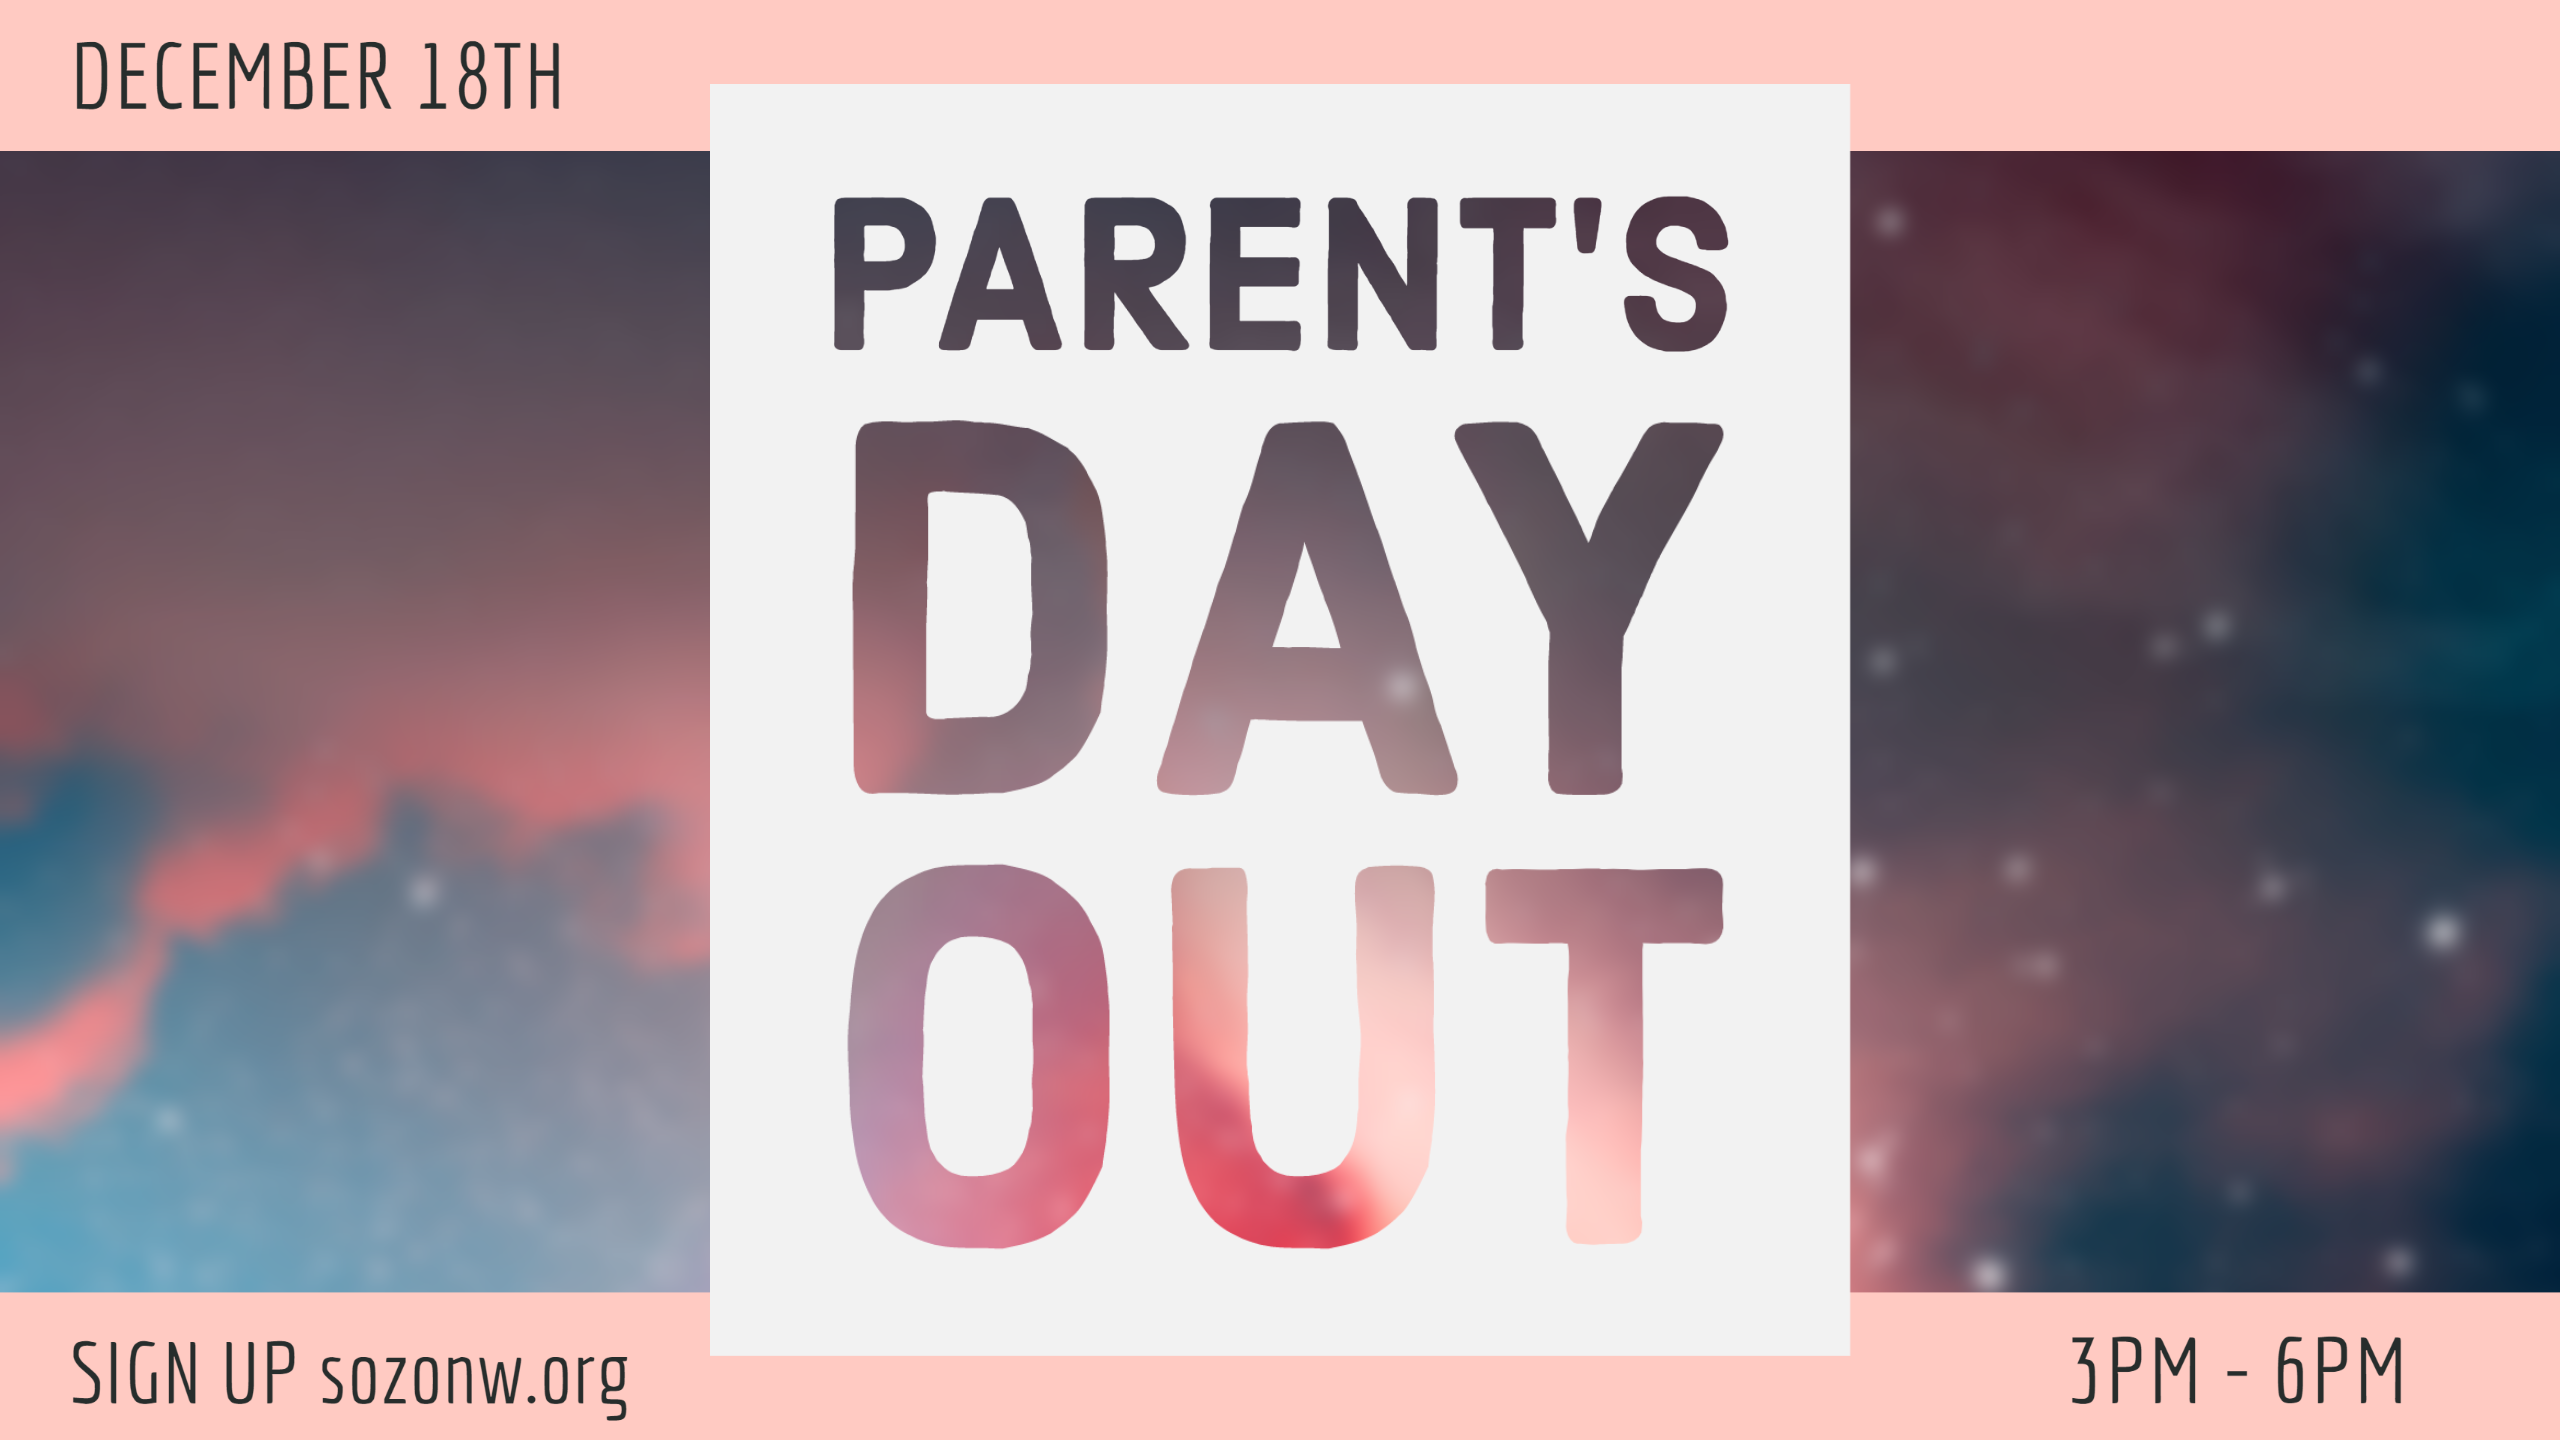 Parents Day Out Image